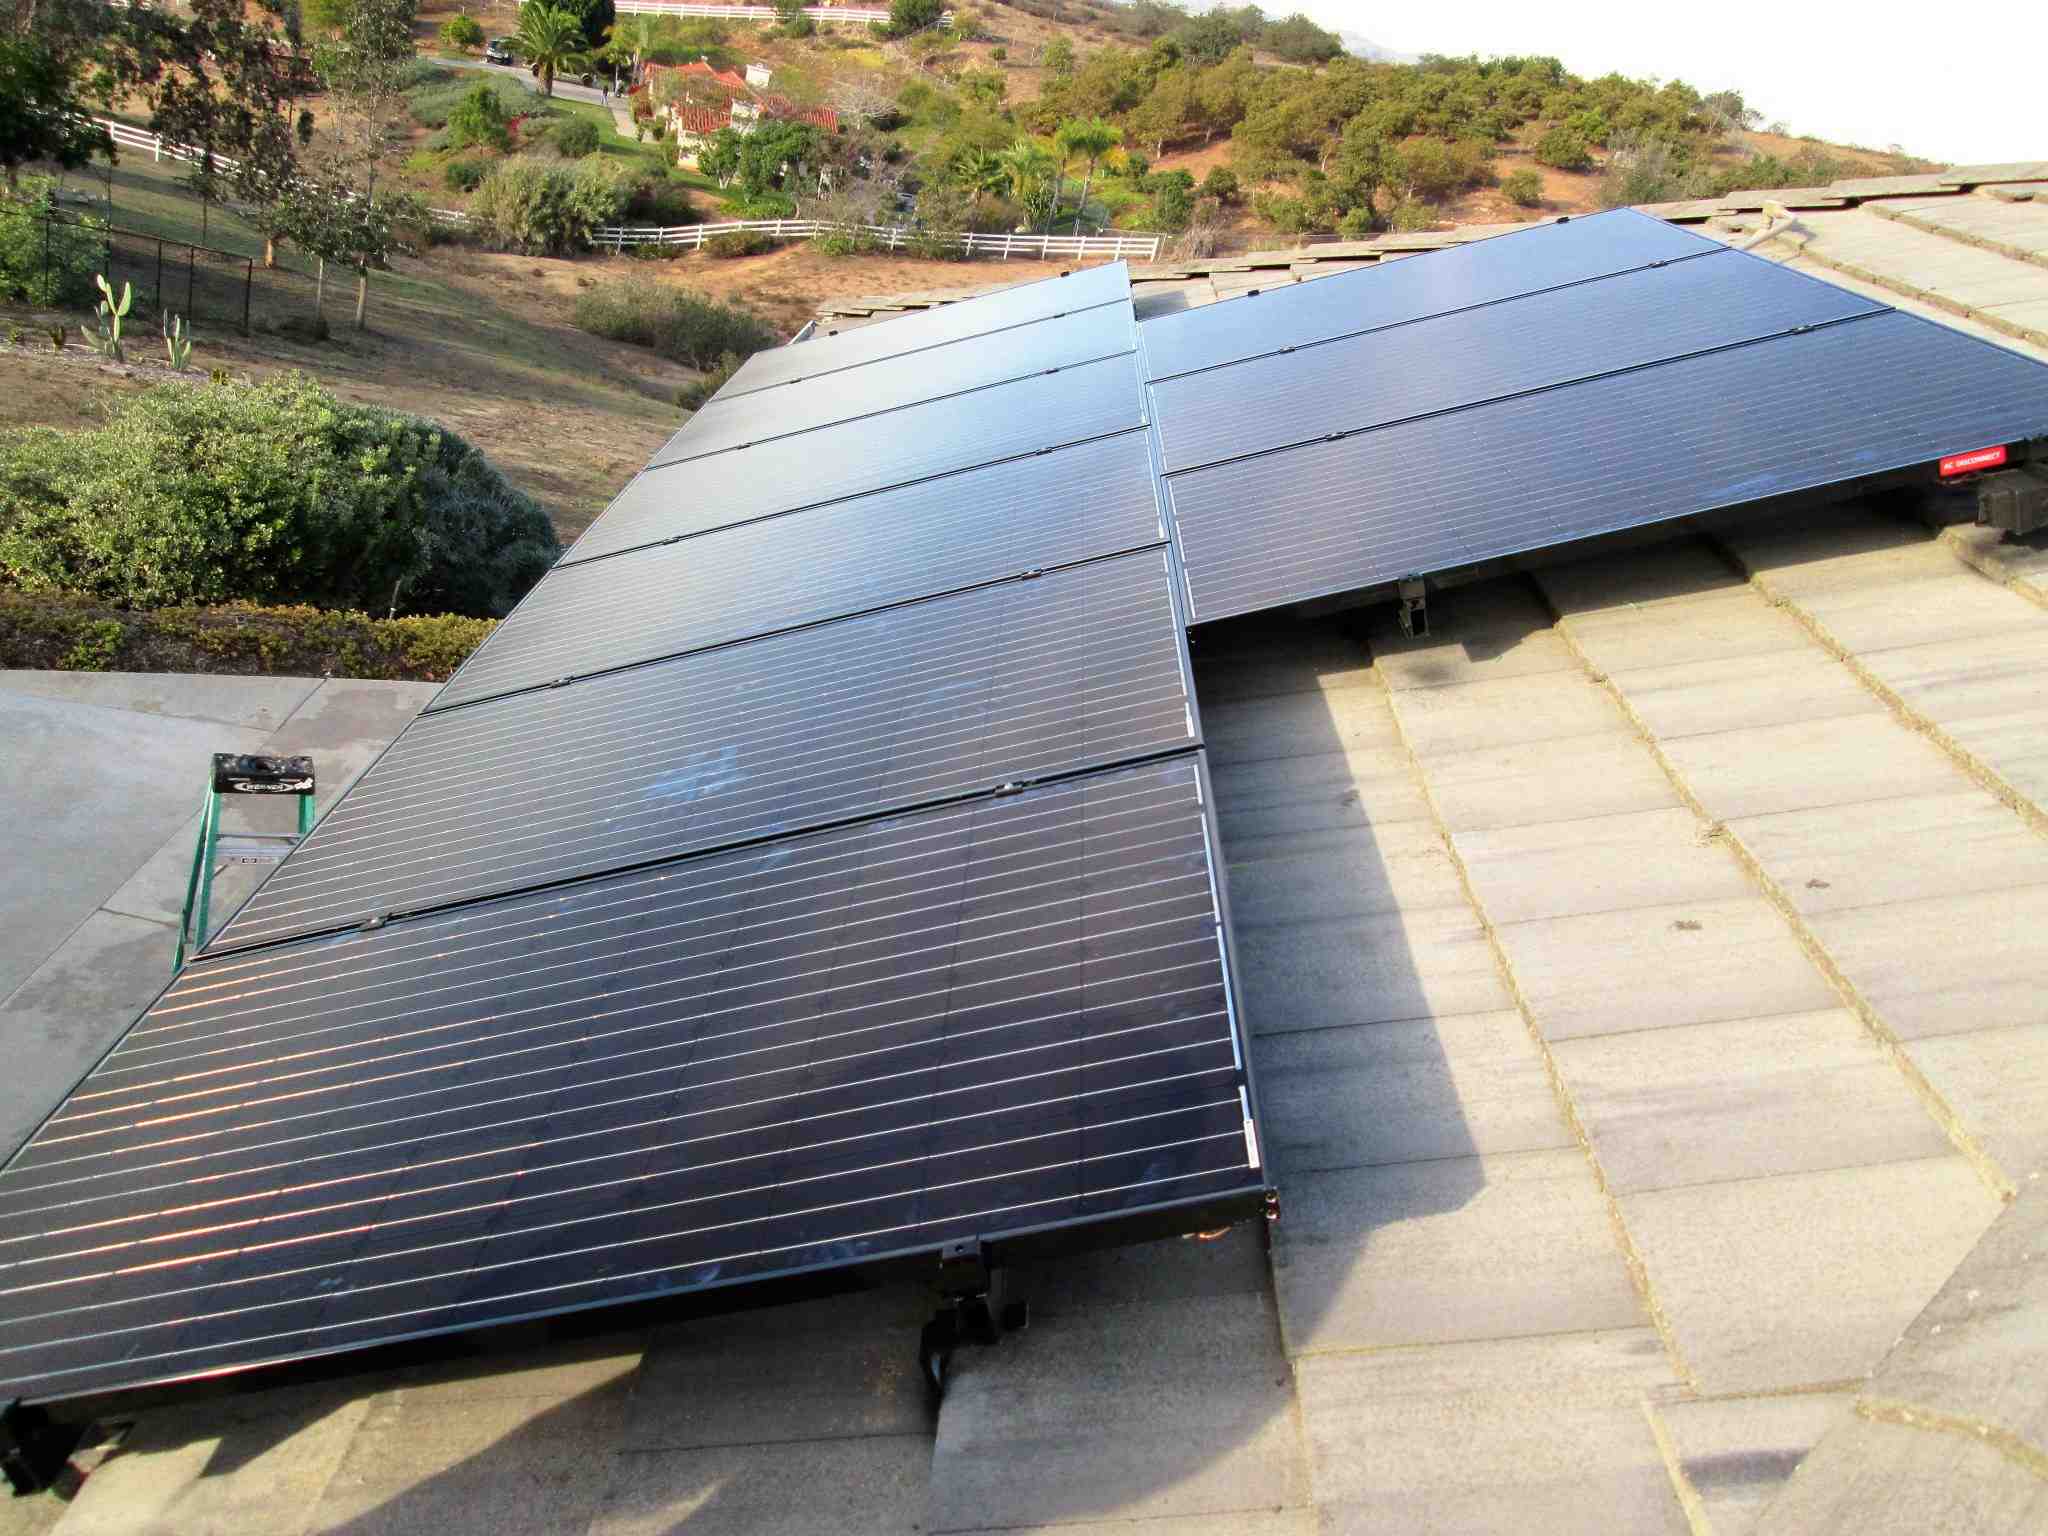 Why solar panels are bad?